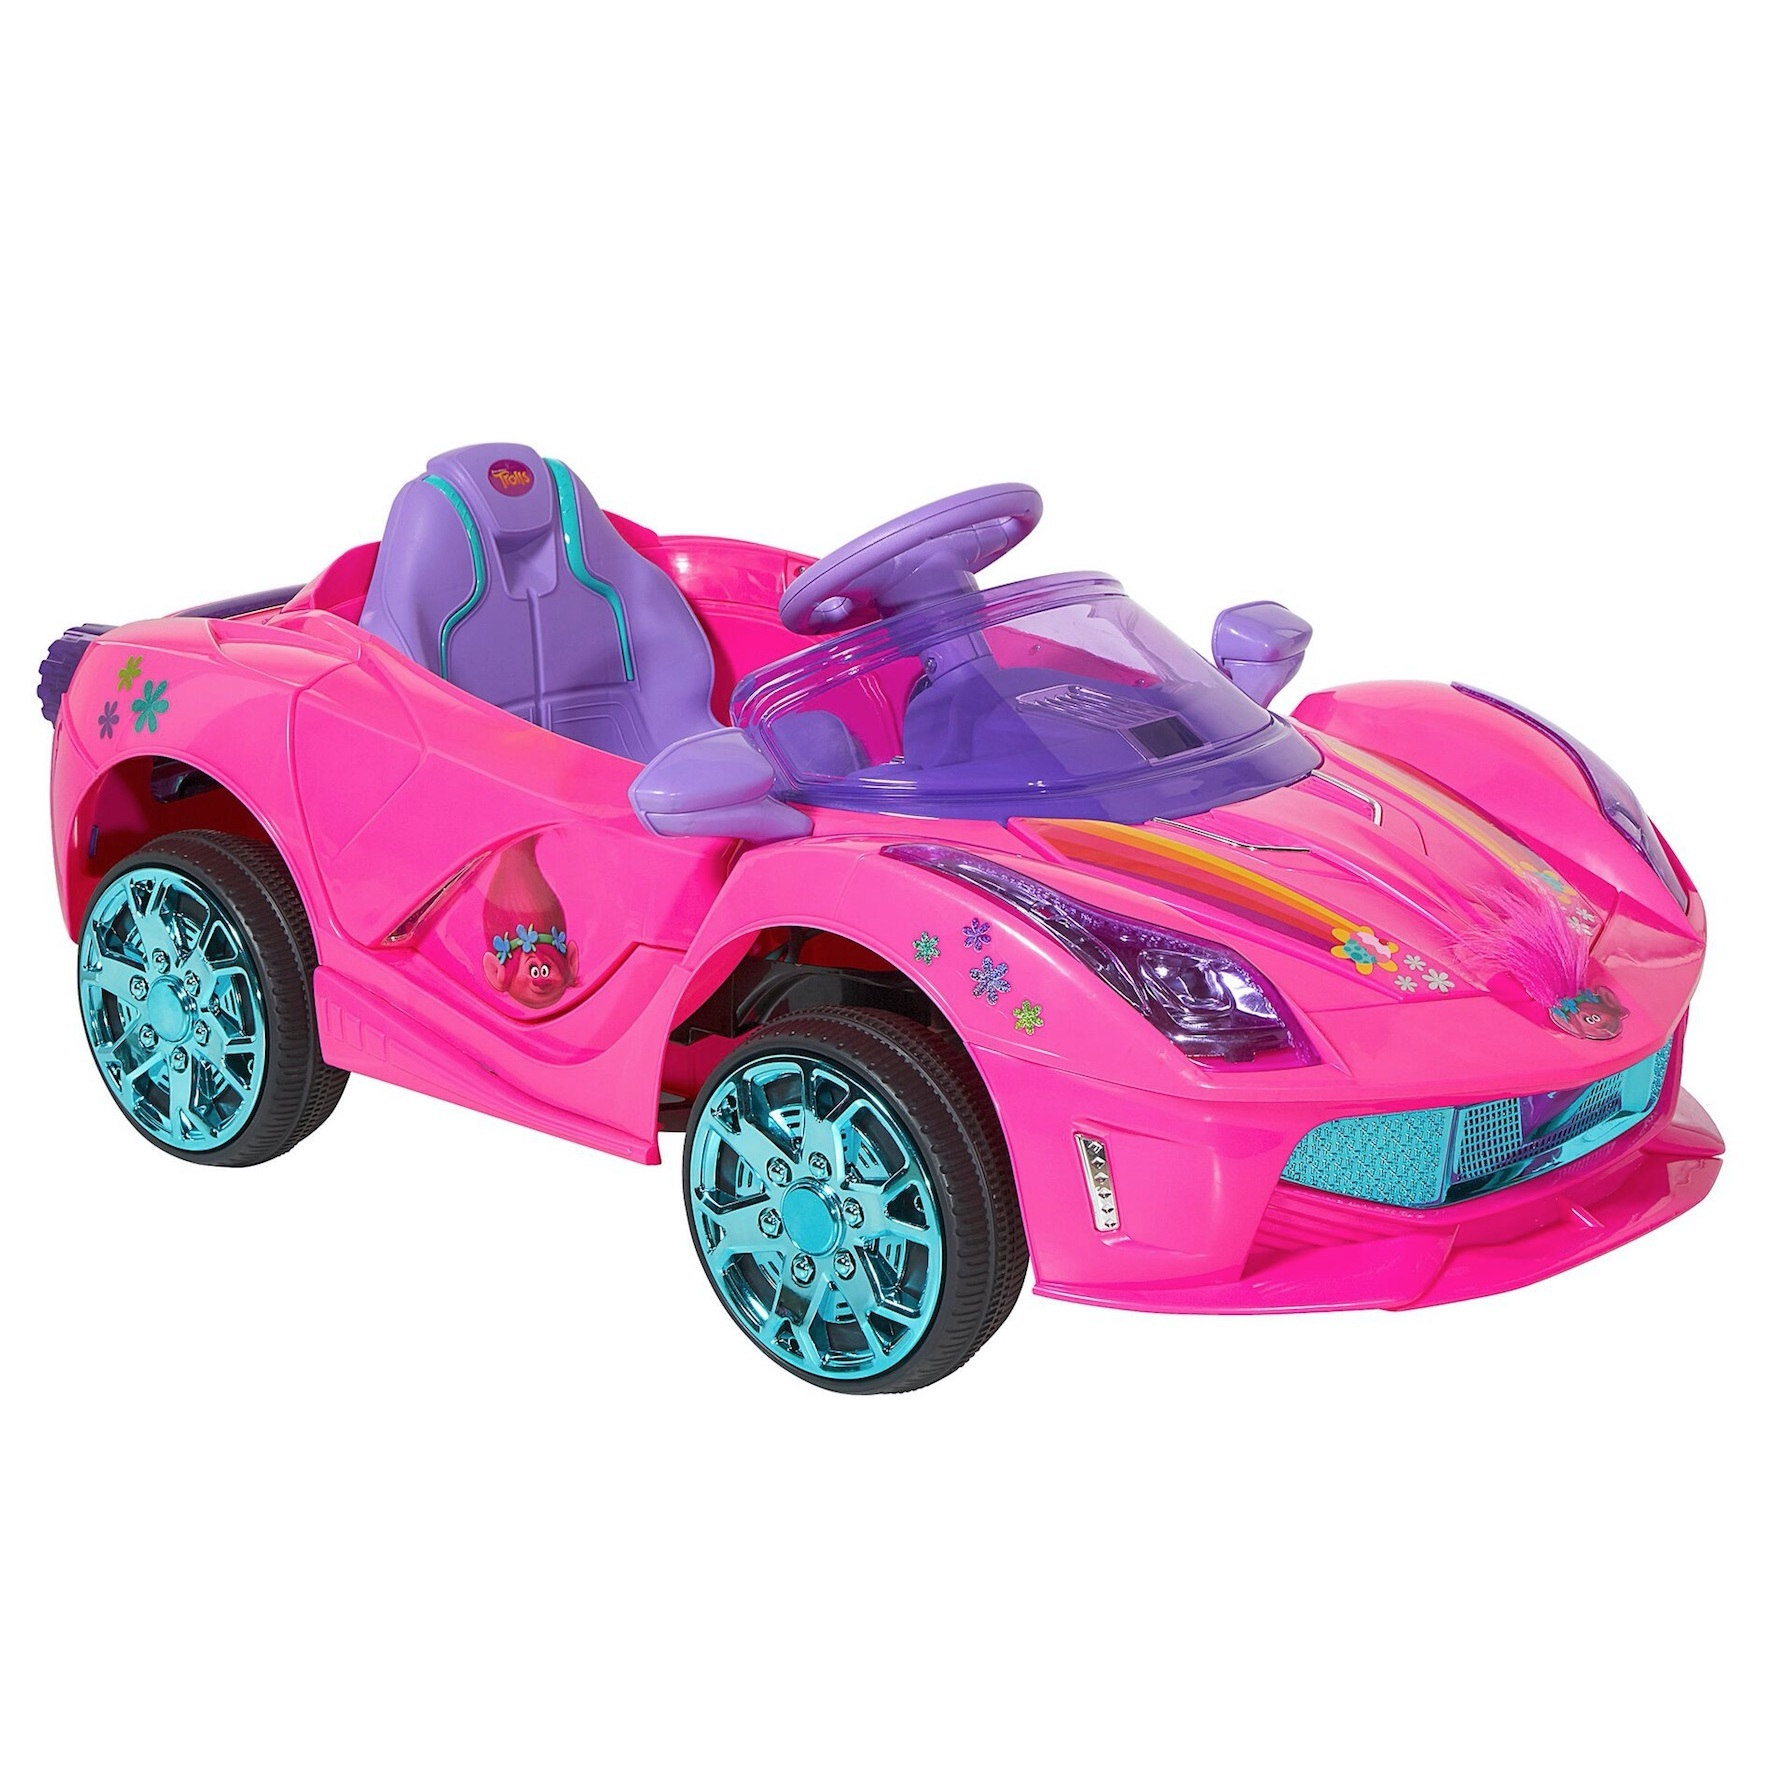 Dynacraft Trolls 6V Super Coupe Ride-On for Kids by Dynacraft - image 2 of 4